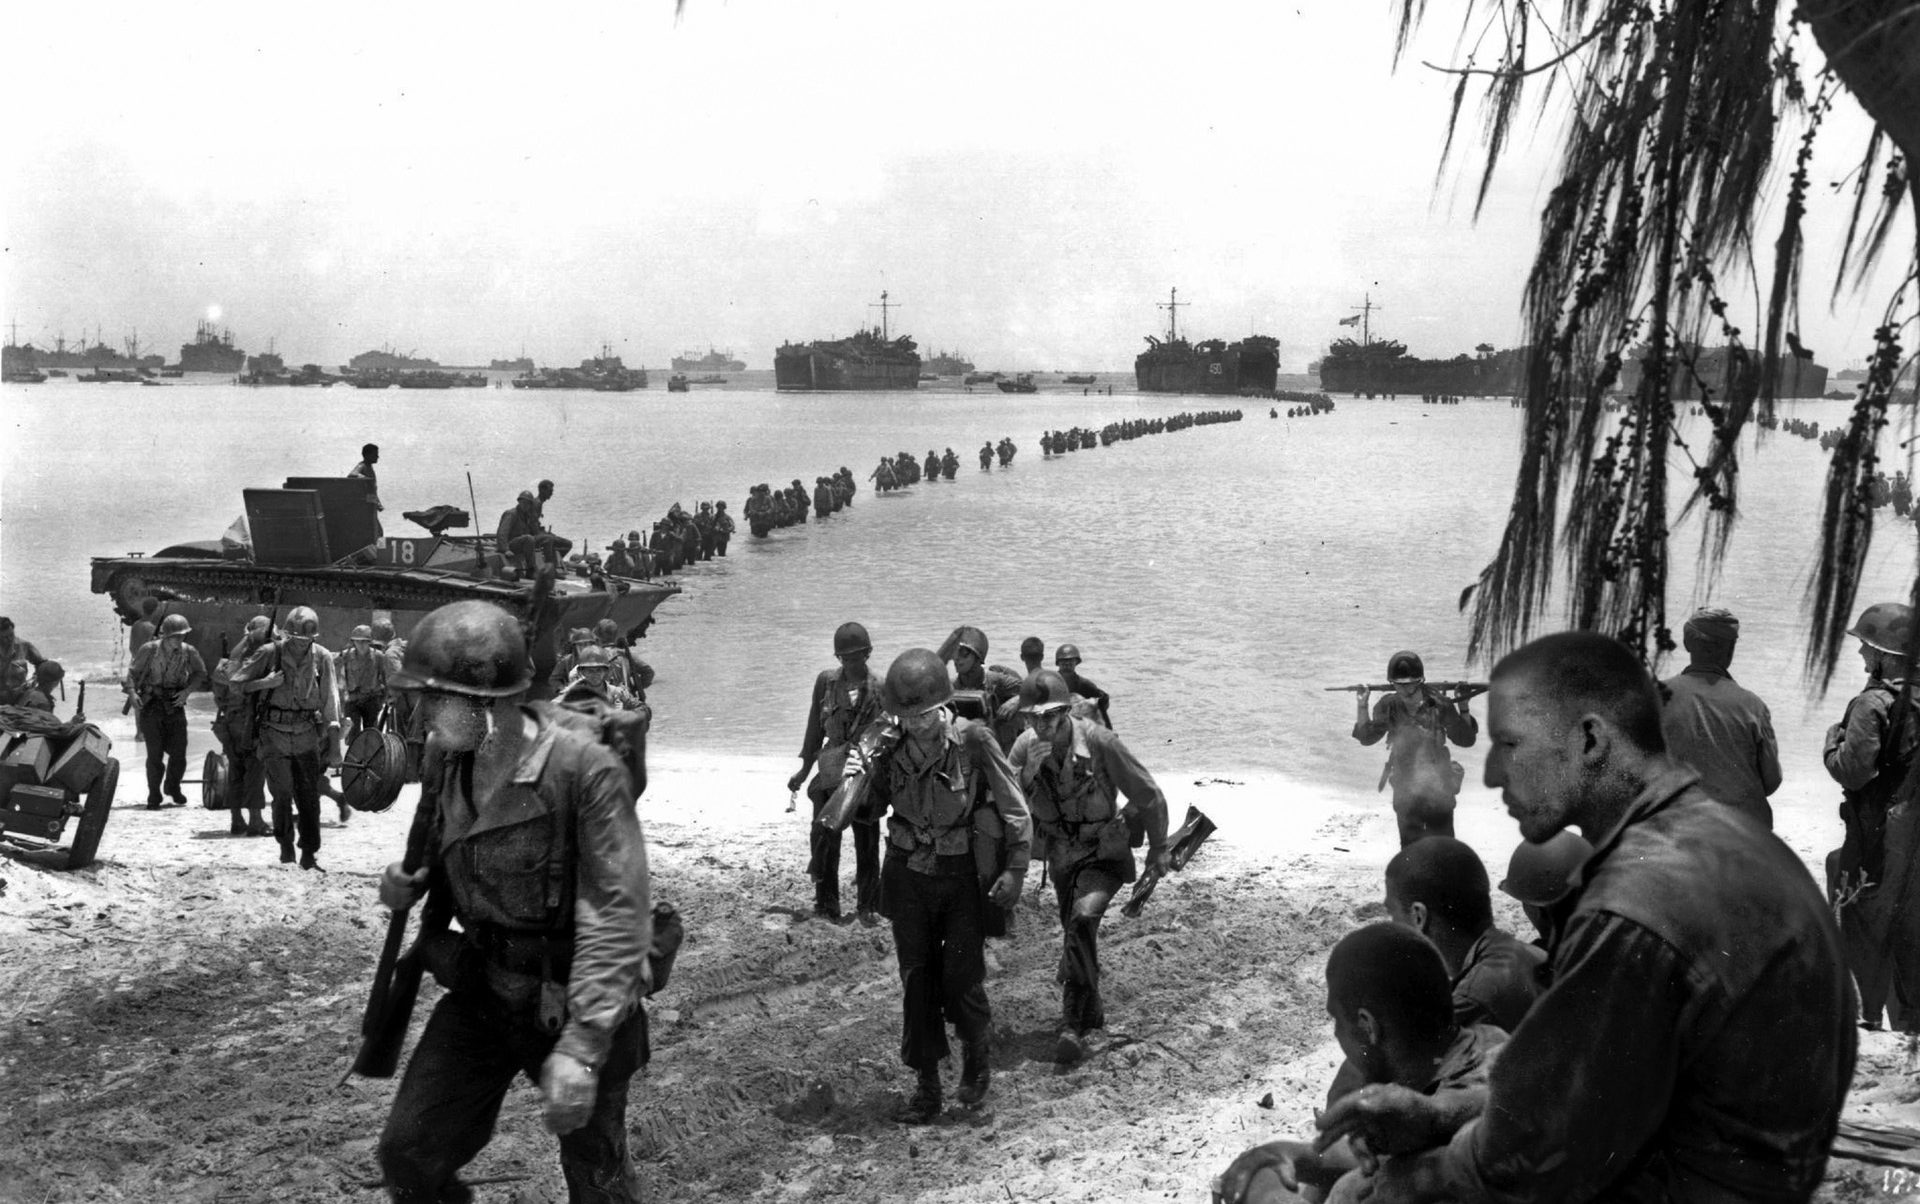 A long line of reinforcements from the U.S. Army’s 27th Infantry Division wade ashore. “Bad blood” between the “two Smiths” on the island resulted in the 27th’s commanding general being relieved of command.